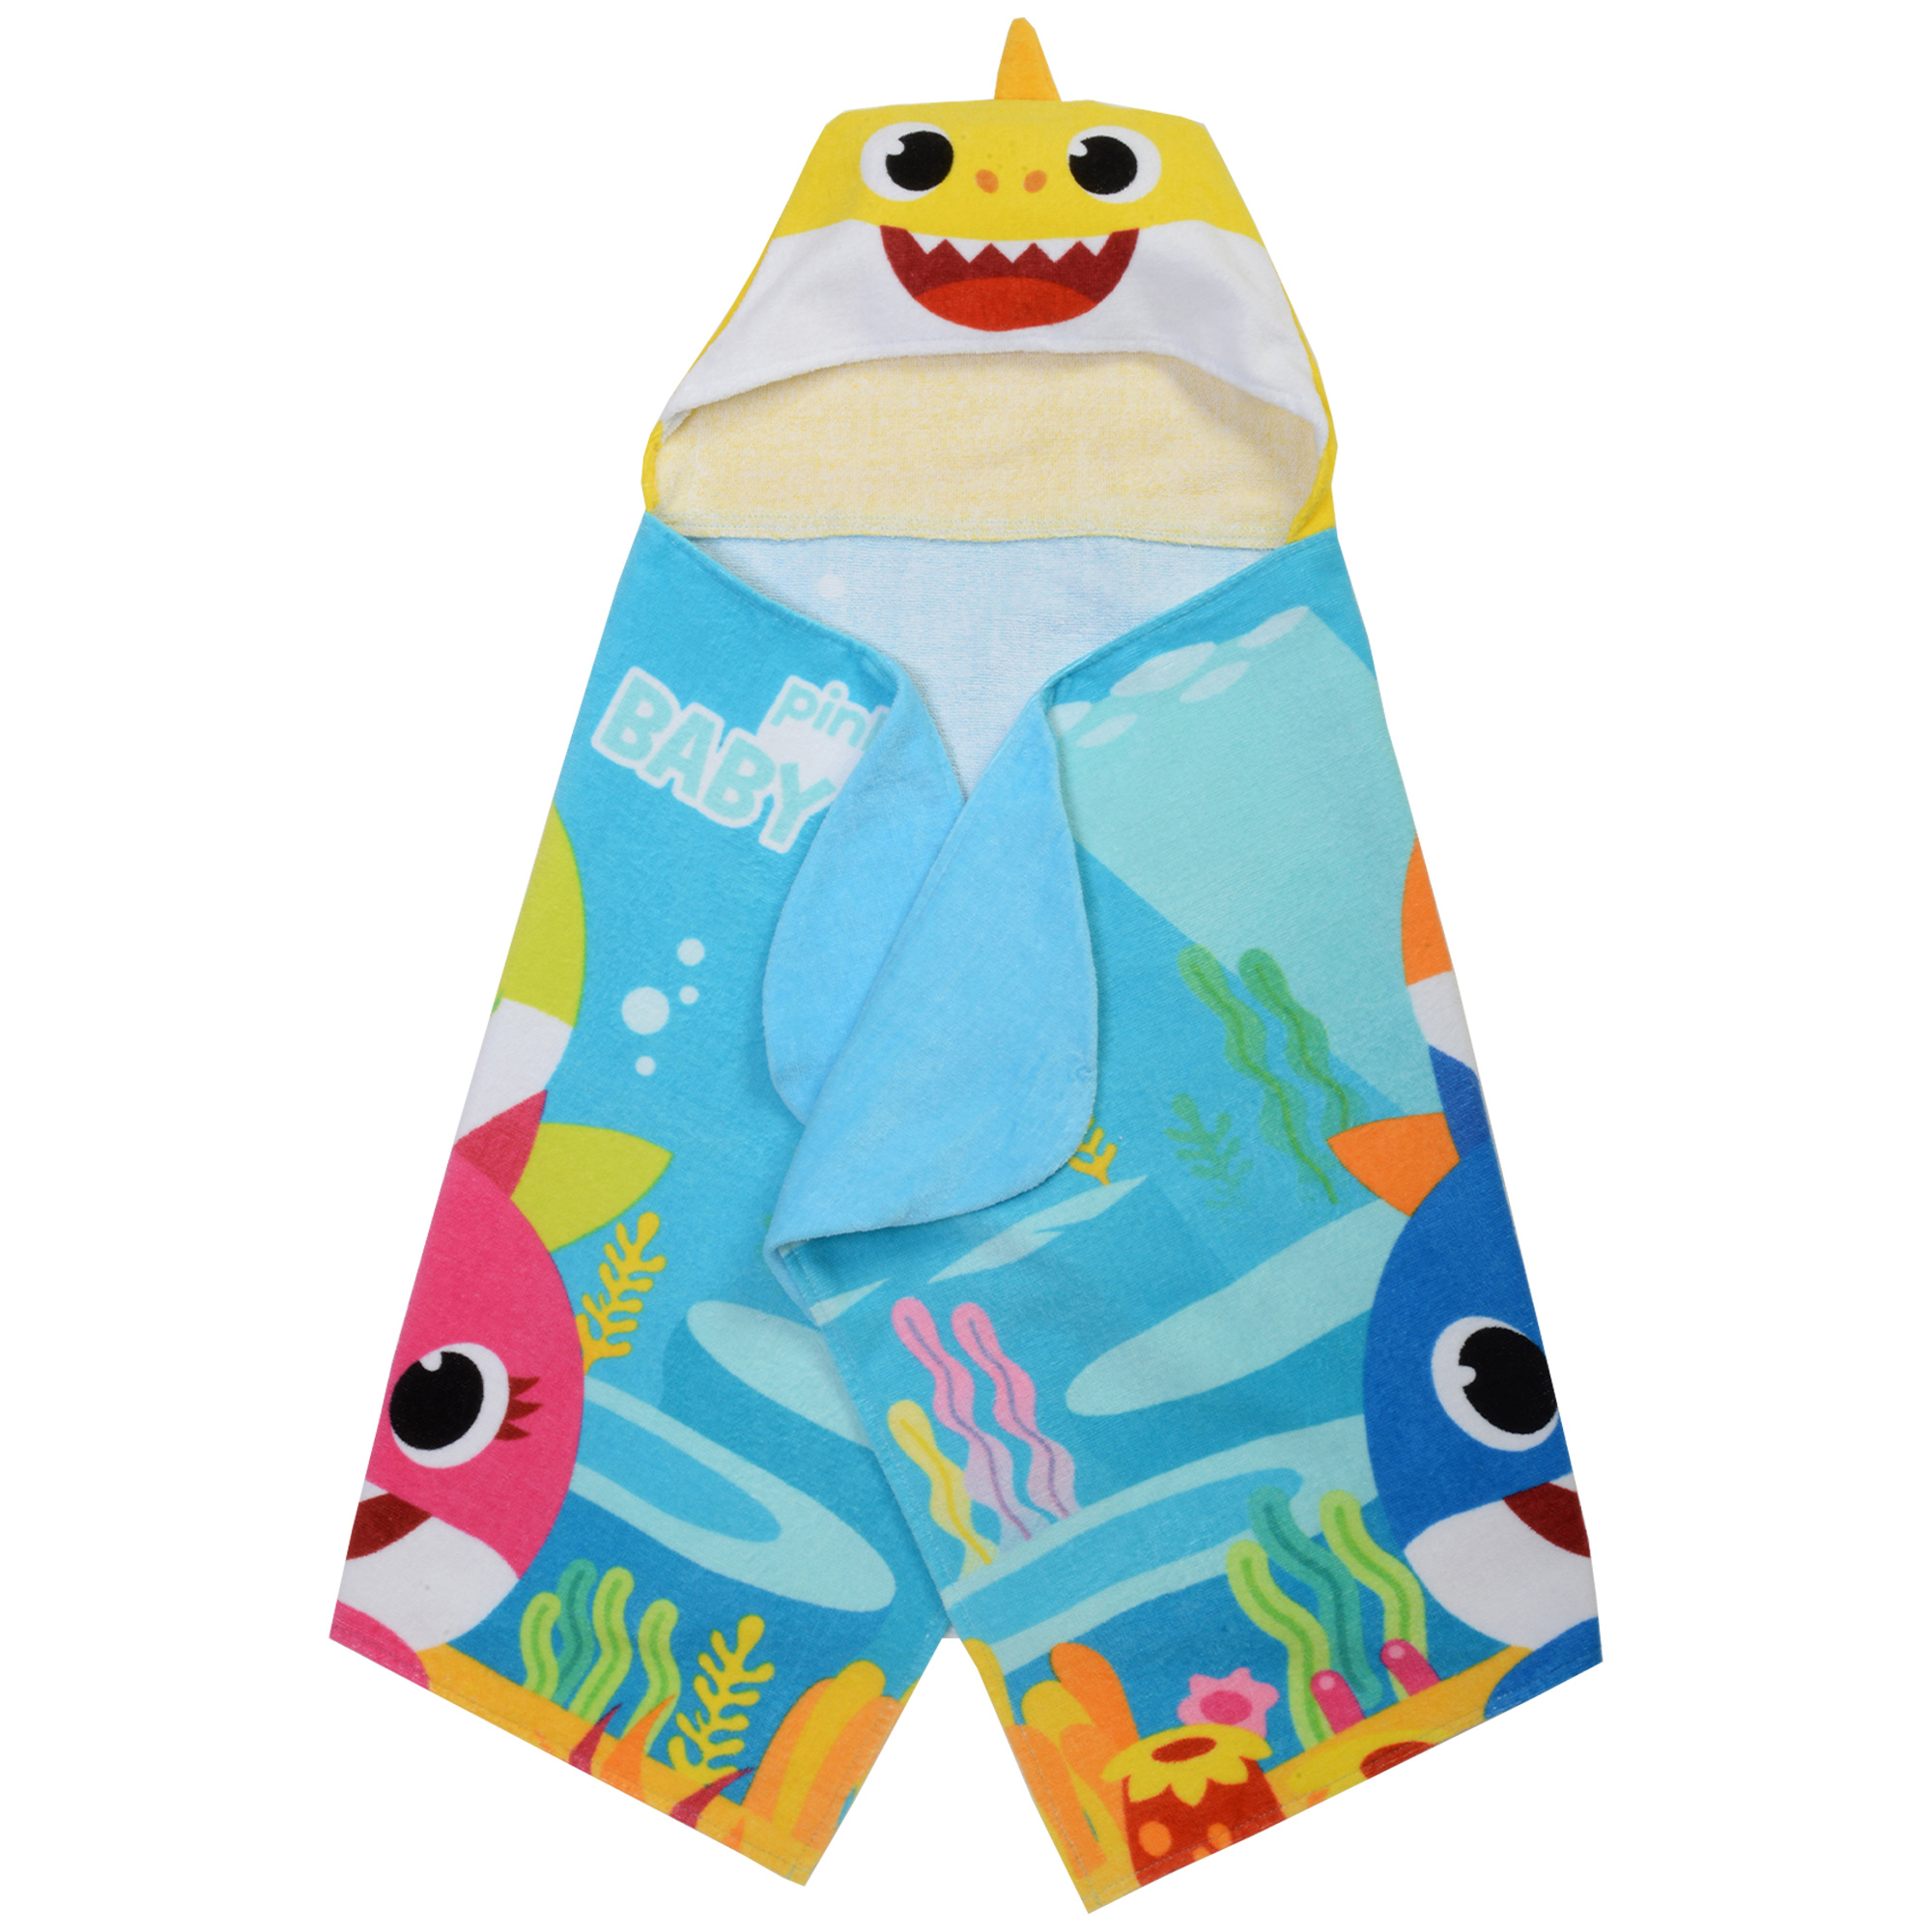 Baby Shark Kids Cotton Hooded Towel - image 1 of 6